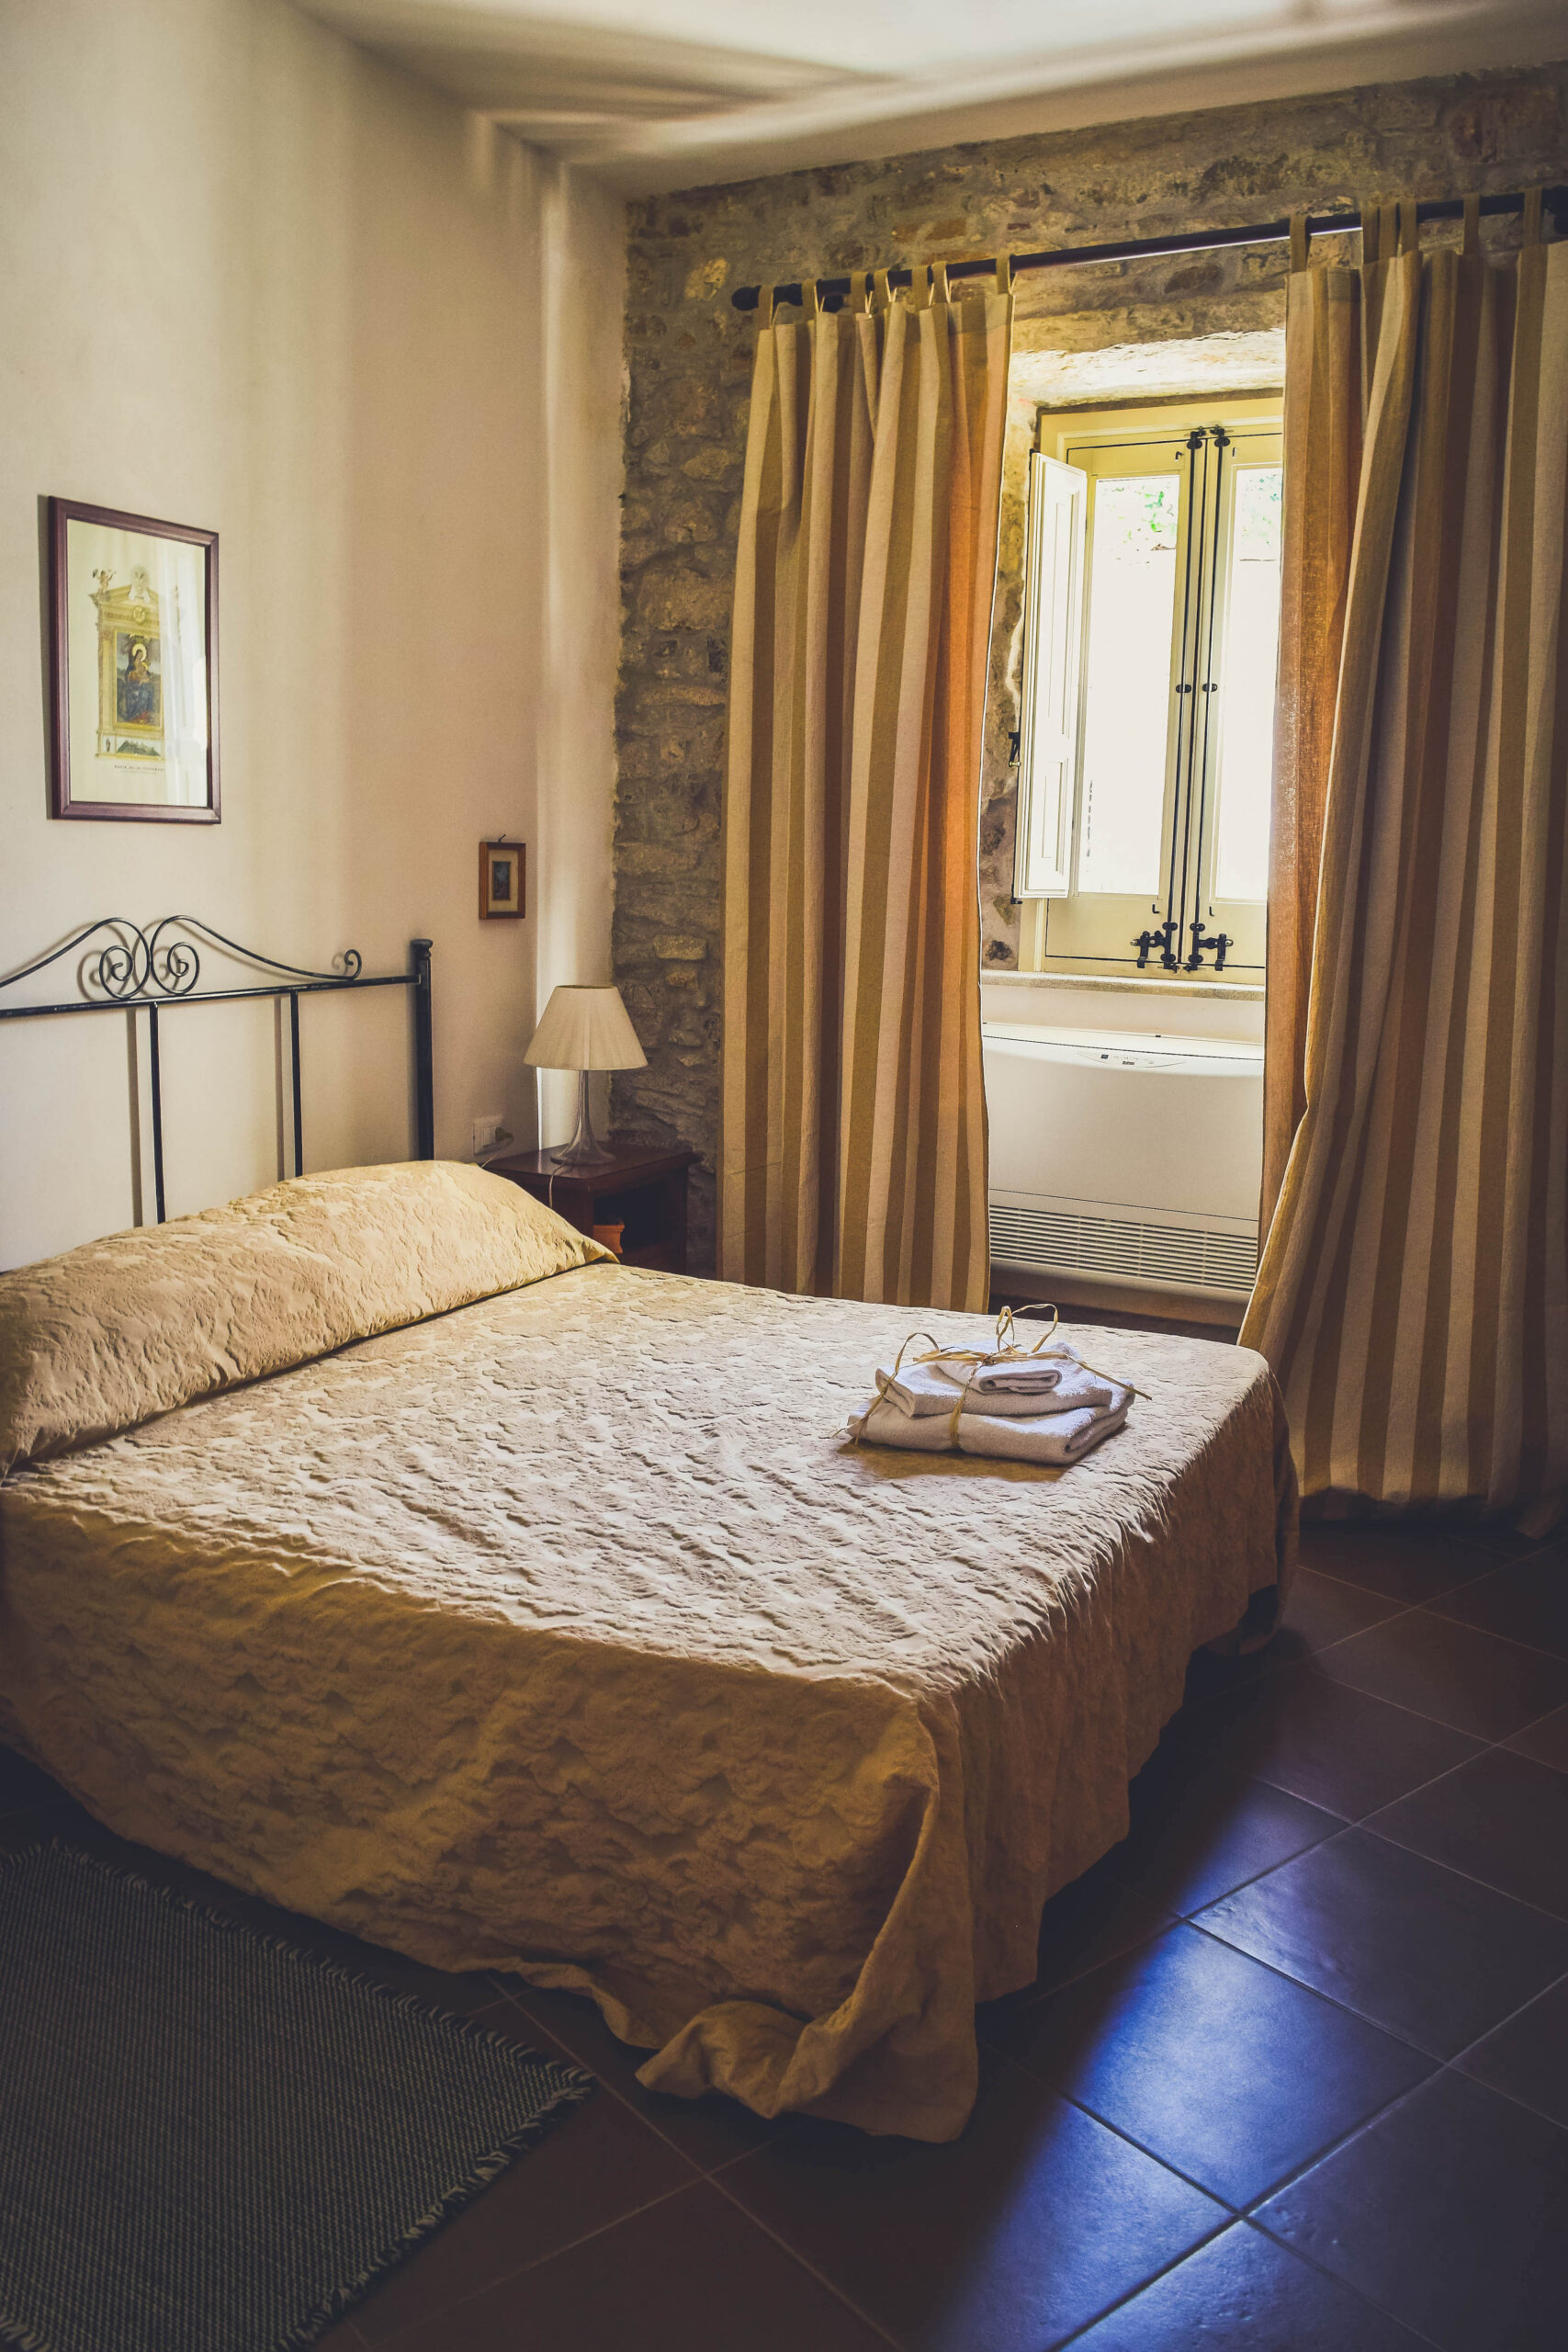 Where to Stay in SIcily Erice Pietre Antiche Apartments Mountain Italia Review Airbnb bed and breakfast rare jewel best place to stay svadore